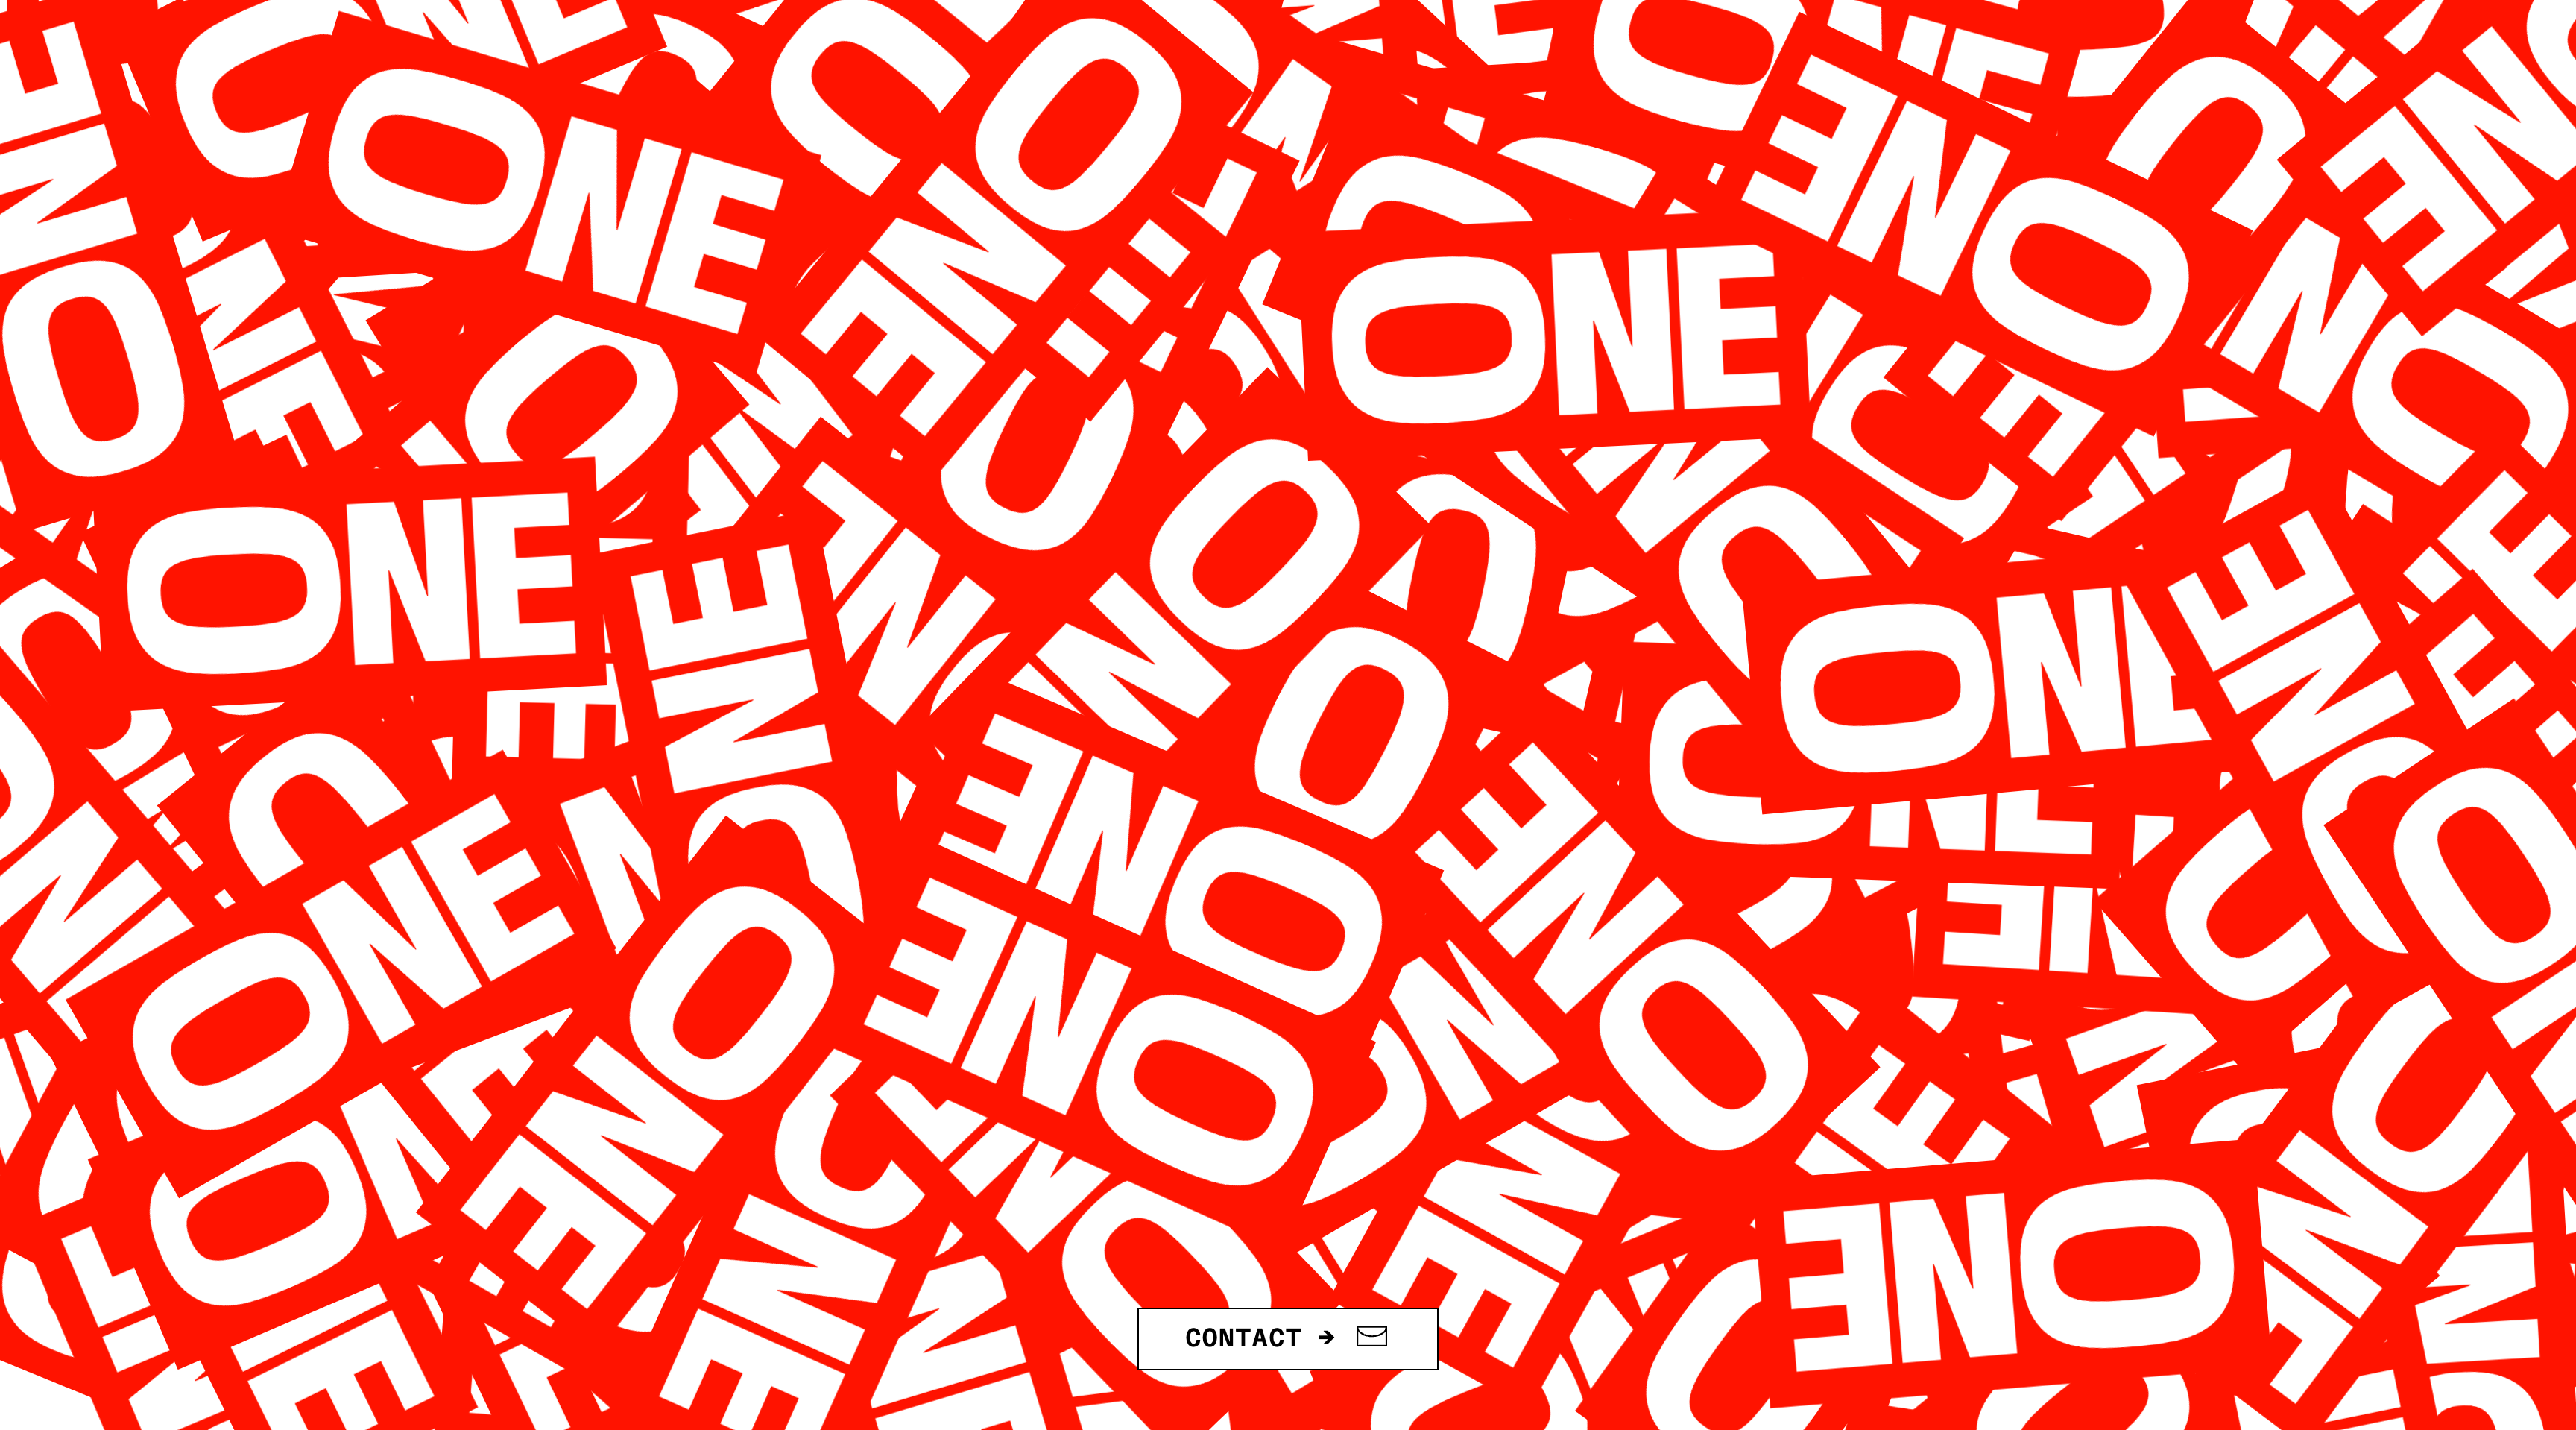 A dense, overlapping pattern of the word 'ONE' in various sizes and orientations on a bright red background with a contact button at the bottom center.